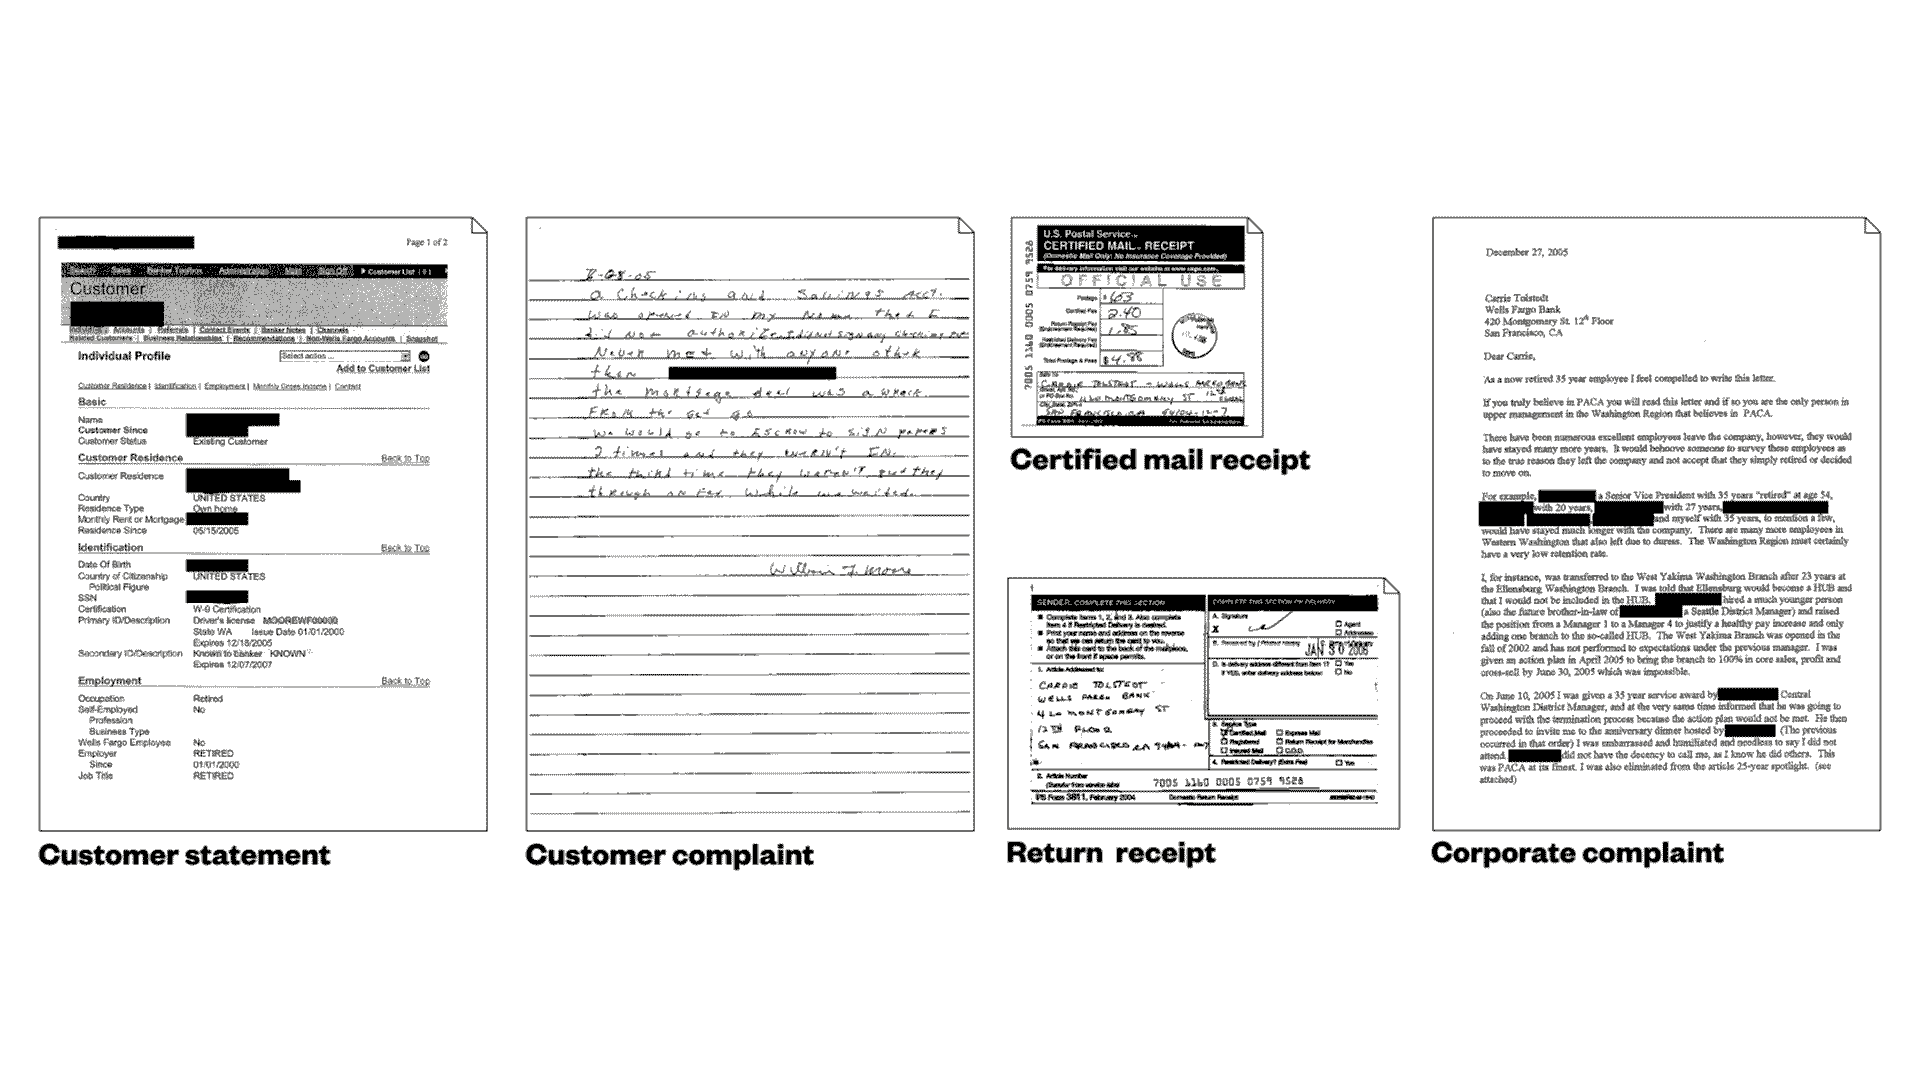 Exclusive Documents Show A Wells Fargo Employee Informed The Bank Of Fake Customer Accounts In 2006